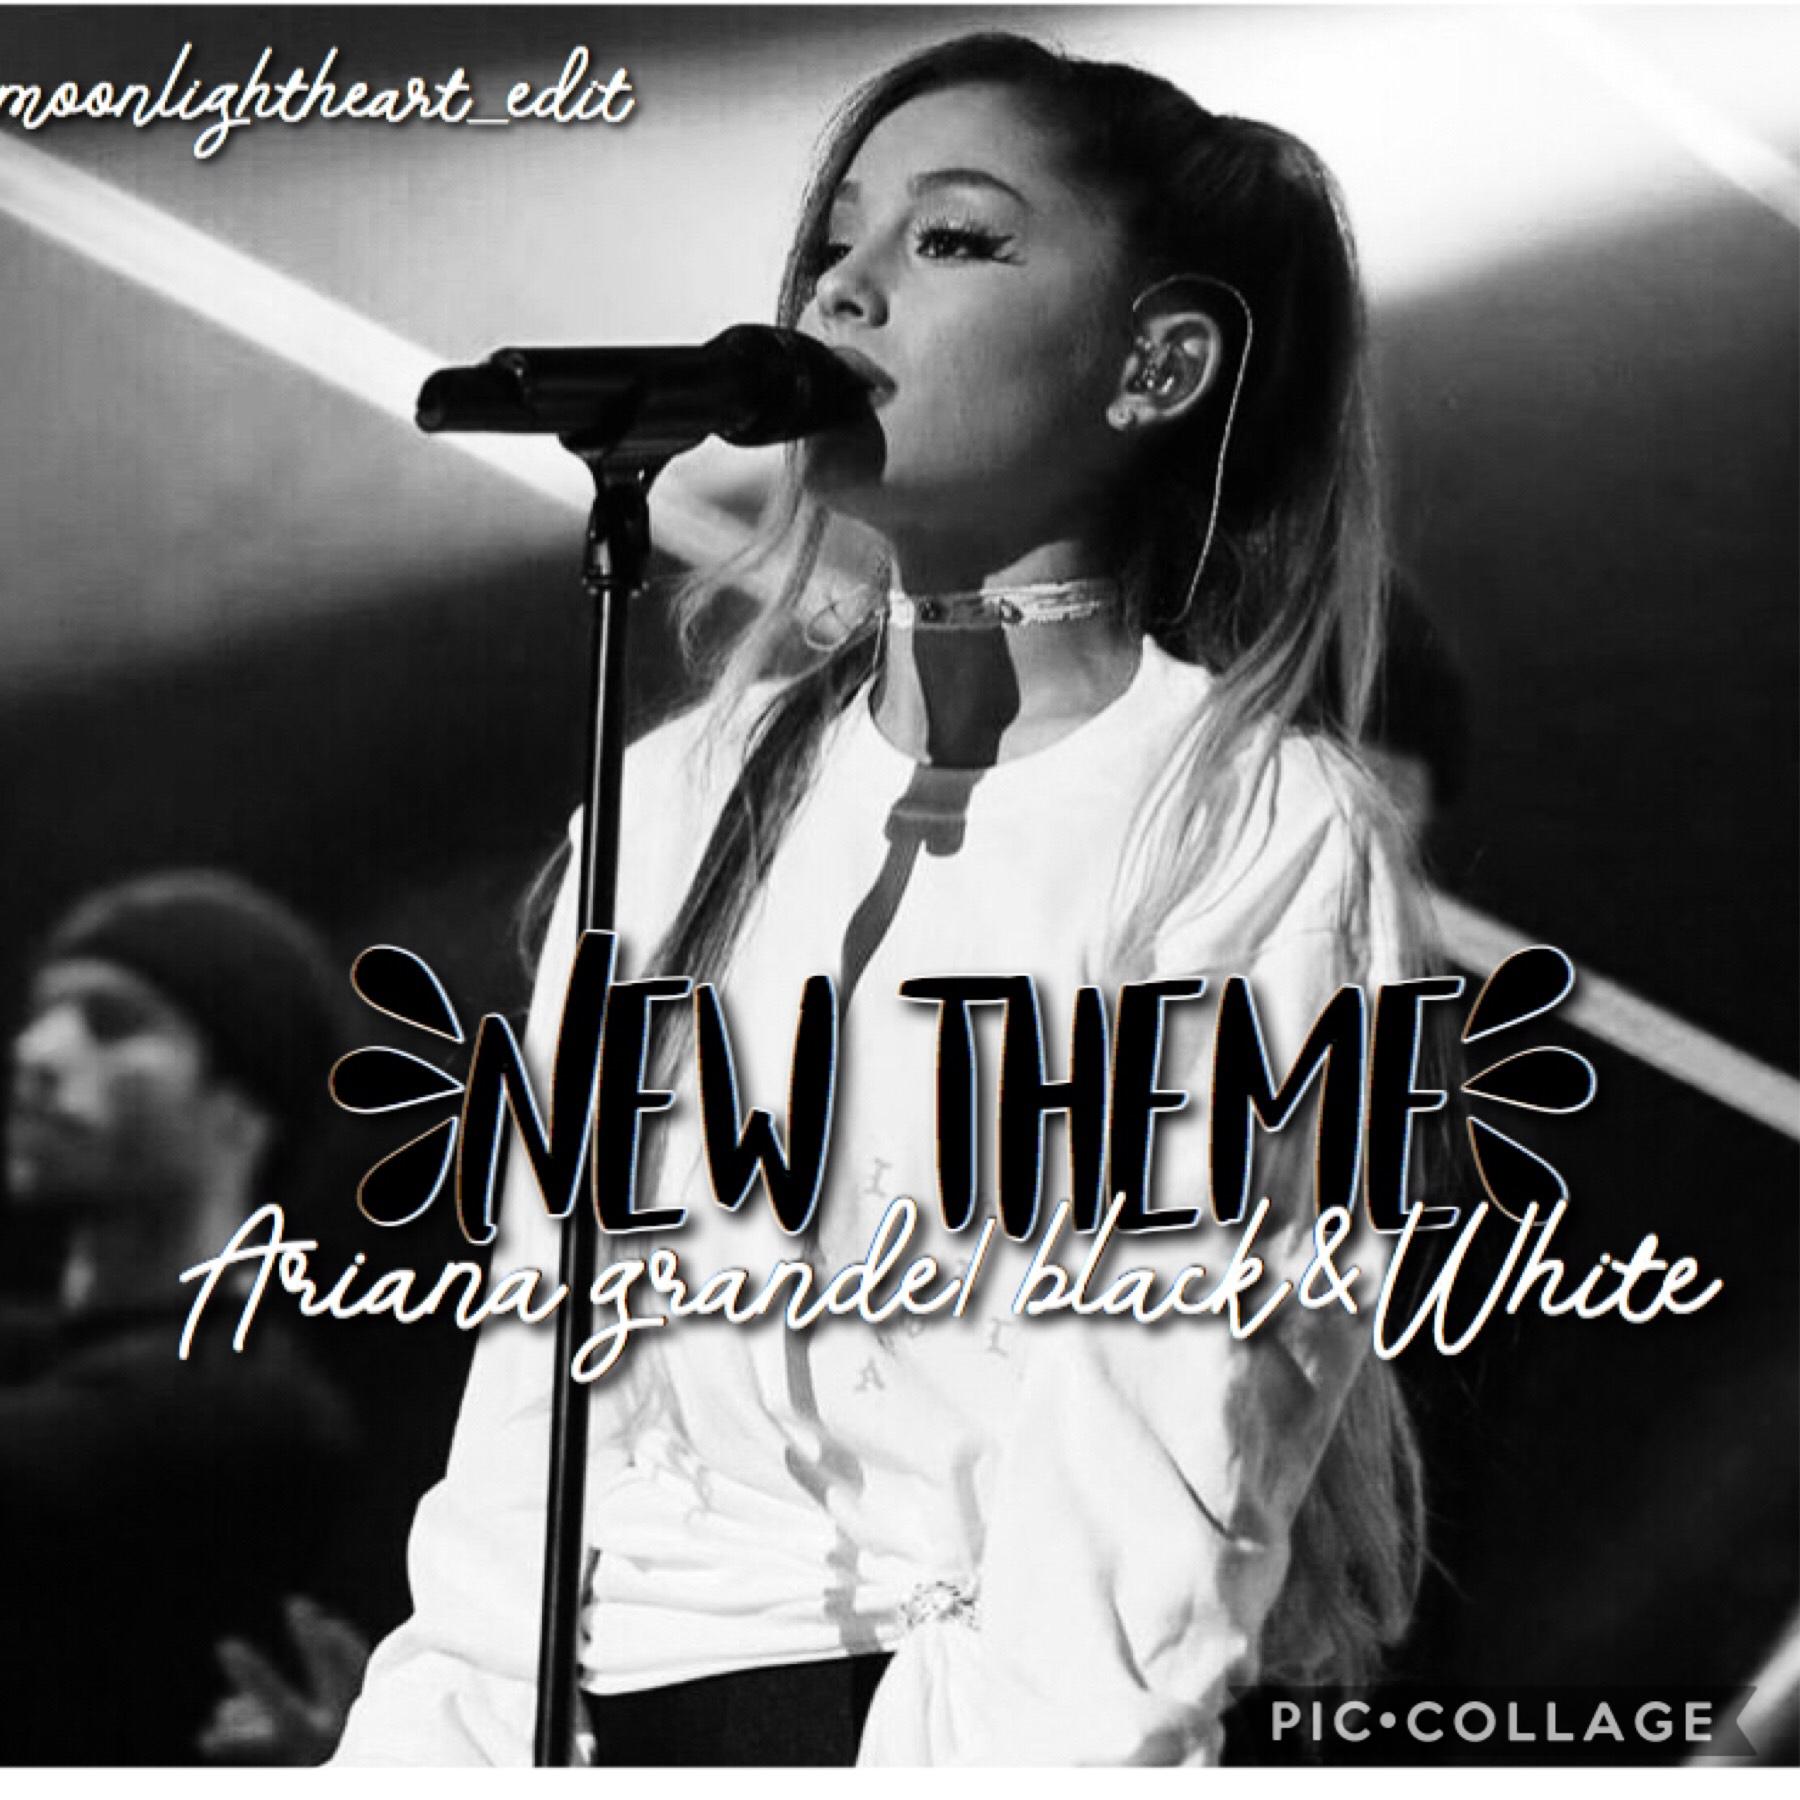 New them is gonna be Ariana grande and it will all be in black and white plus their will be quotes